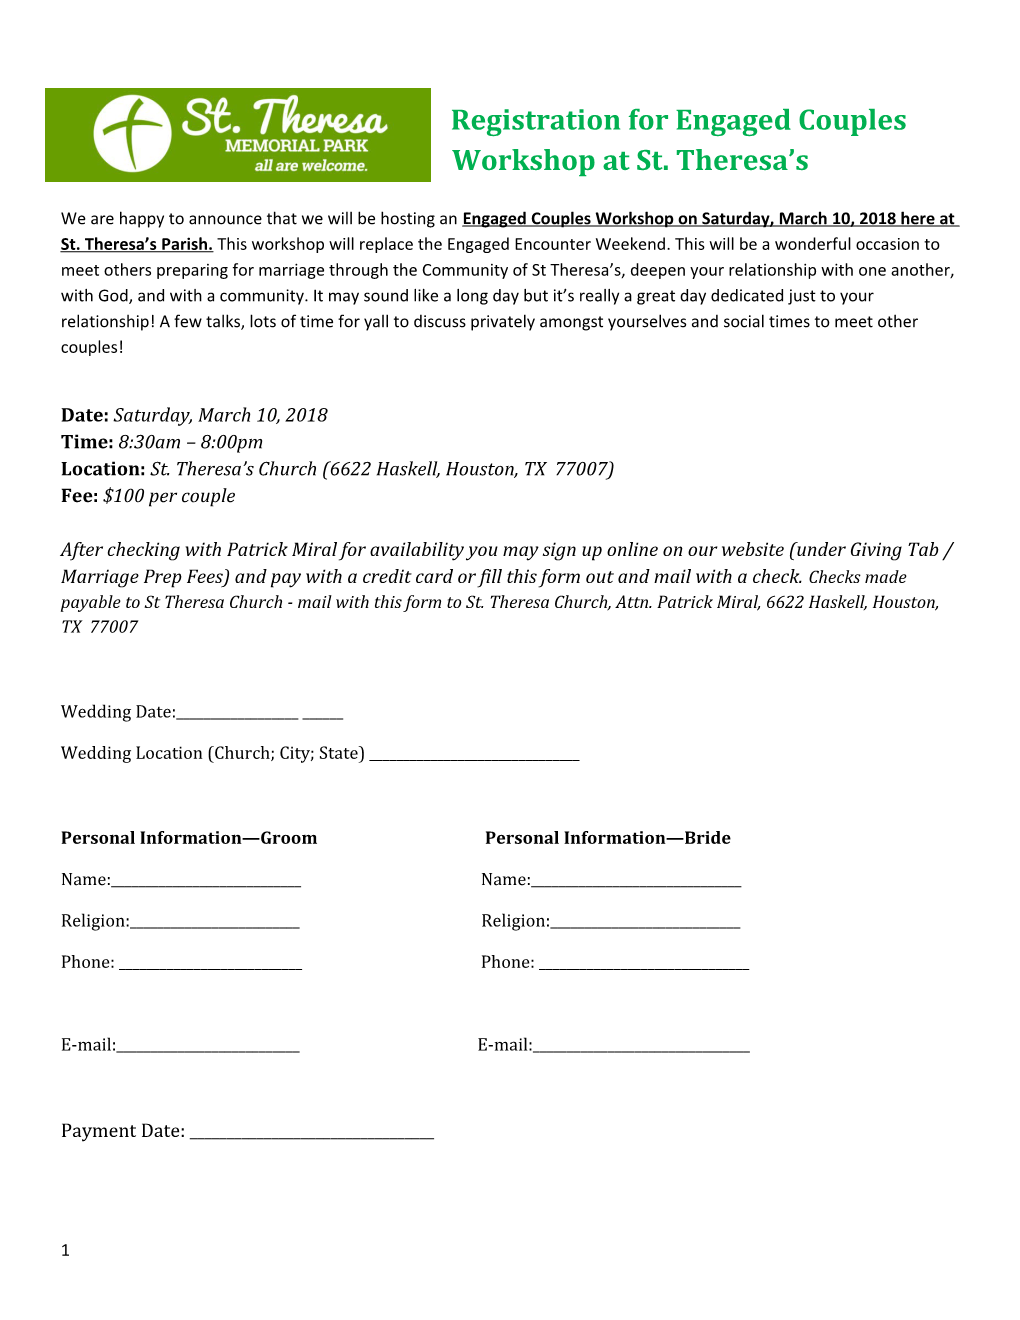 Registration for Engaged Couples Workshopat St. Theresa S